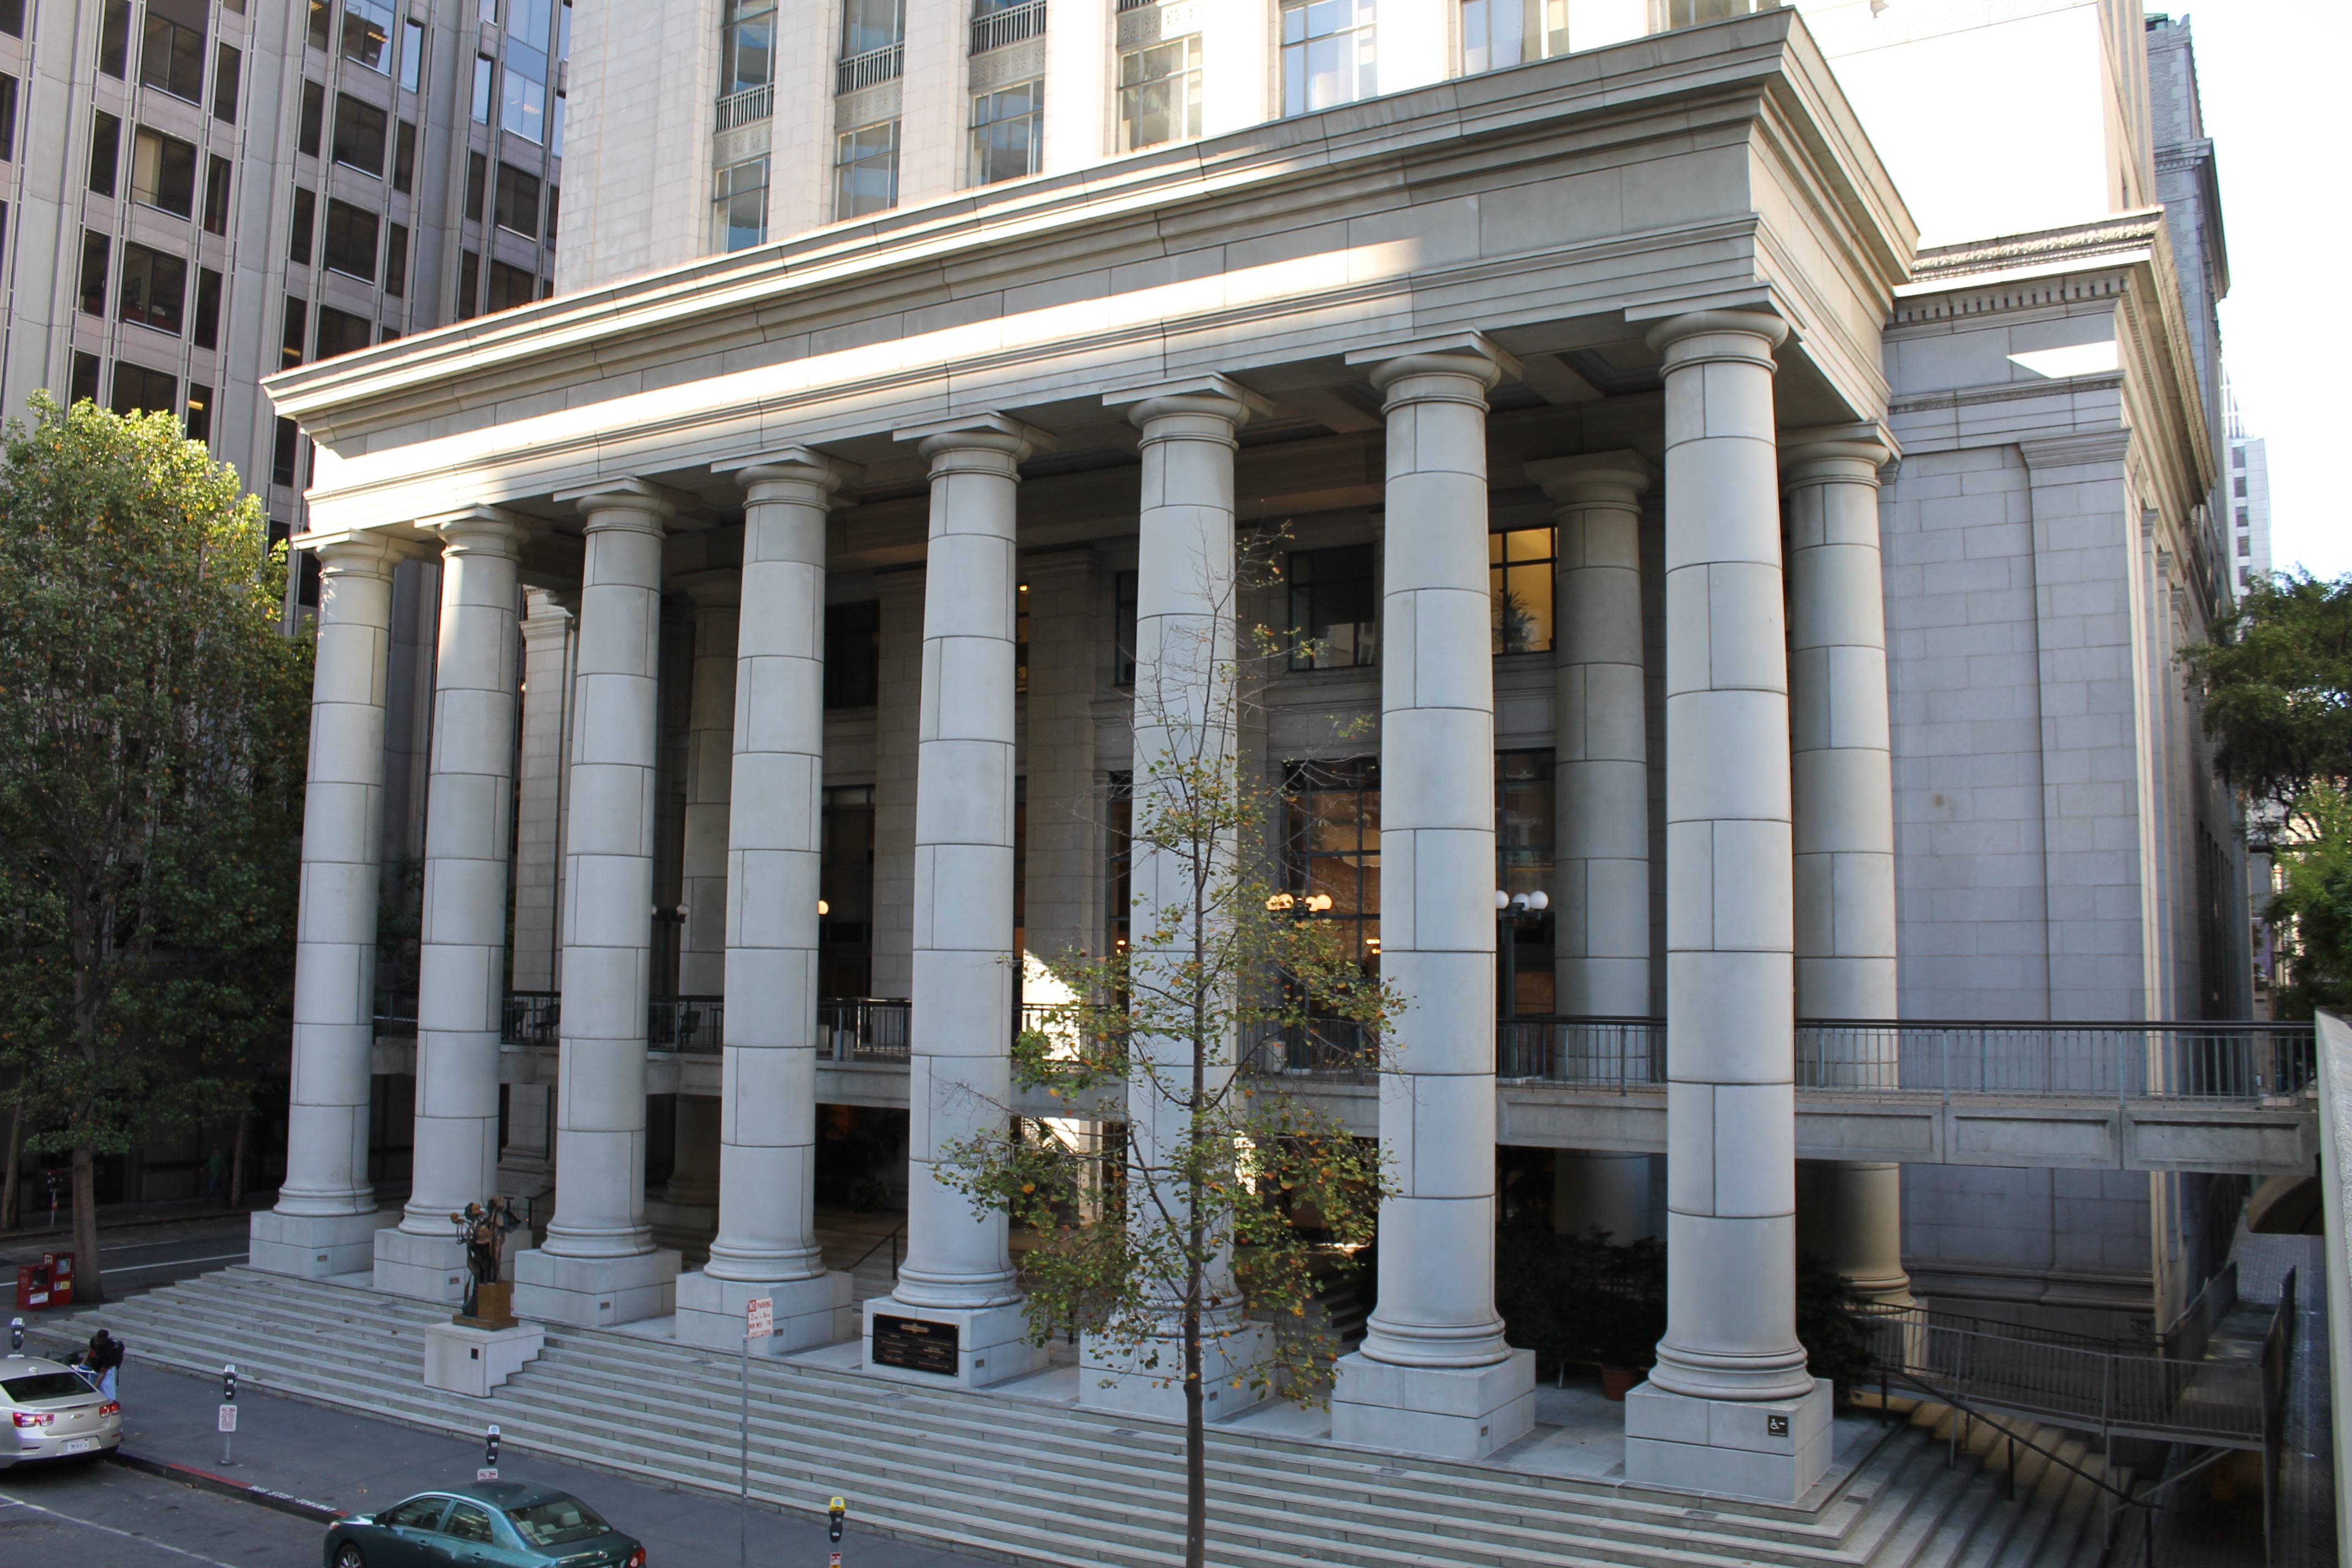 The San Francisco Bar Association Conference Center is the site of 2017 Annual Conference of the Forensic Expert Witness Association (FEWA)